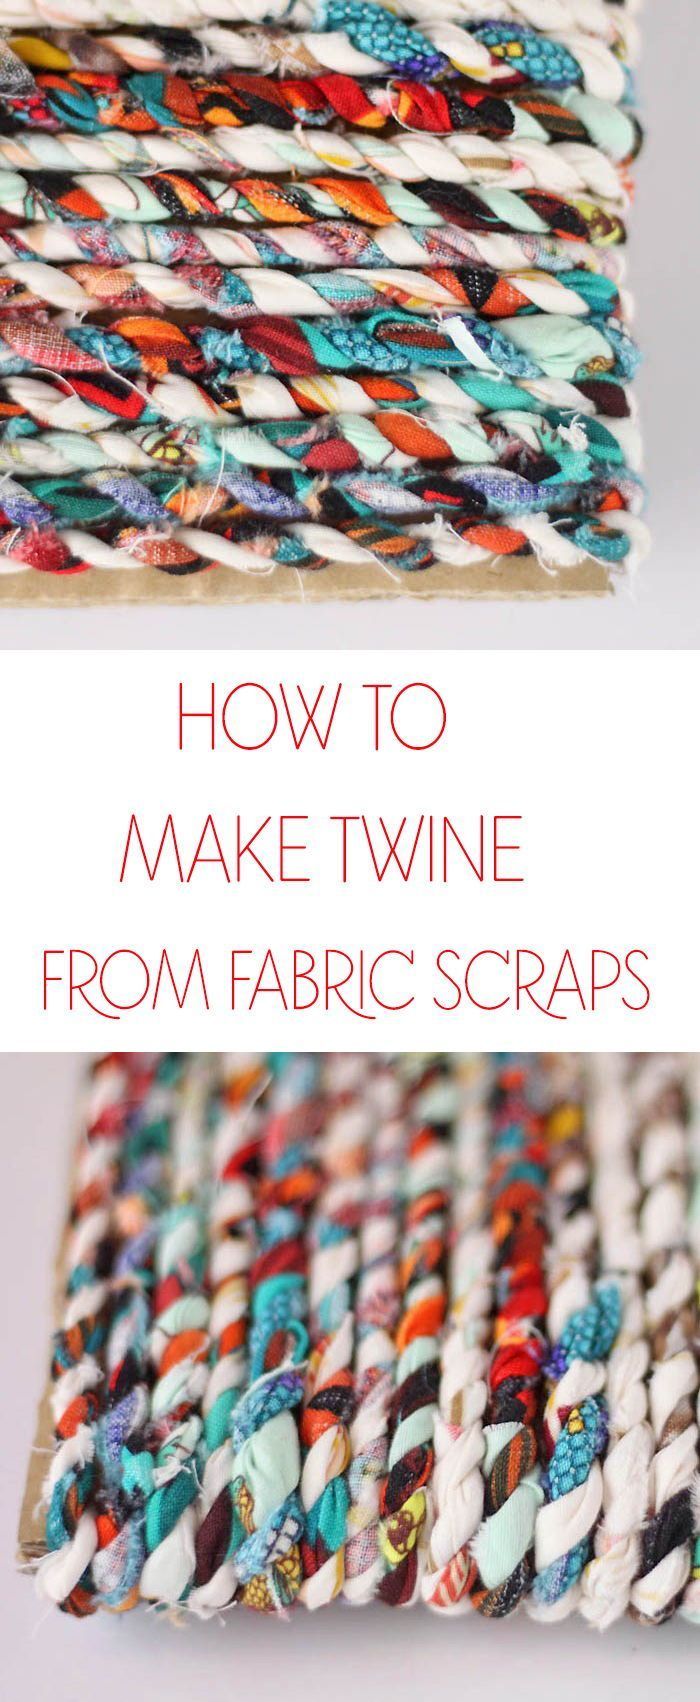 How to Make Twine from Fabric Scraps -   17 recycled fabric crafts
 ideas